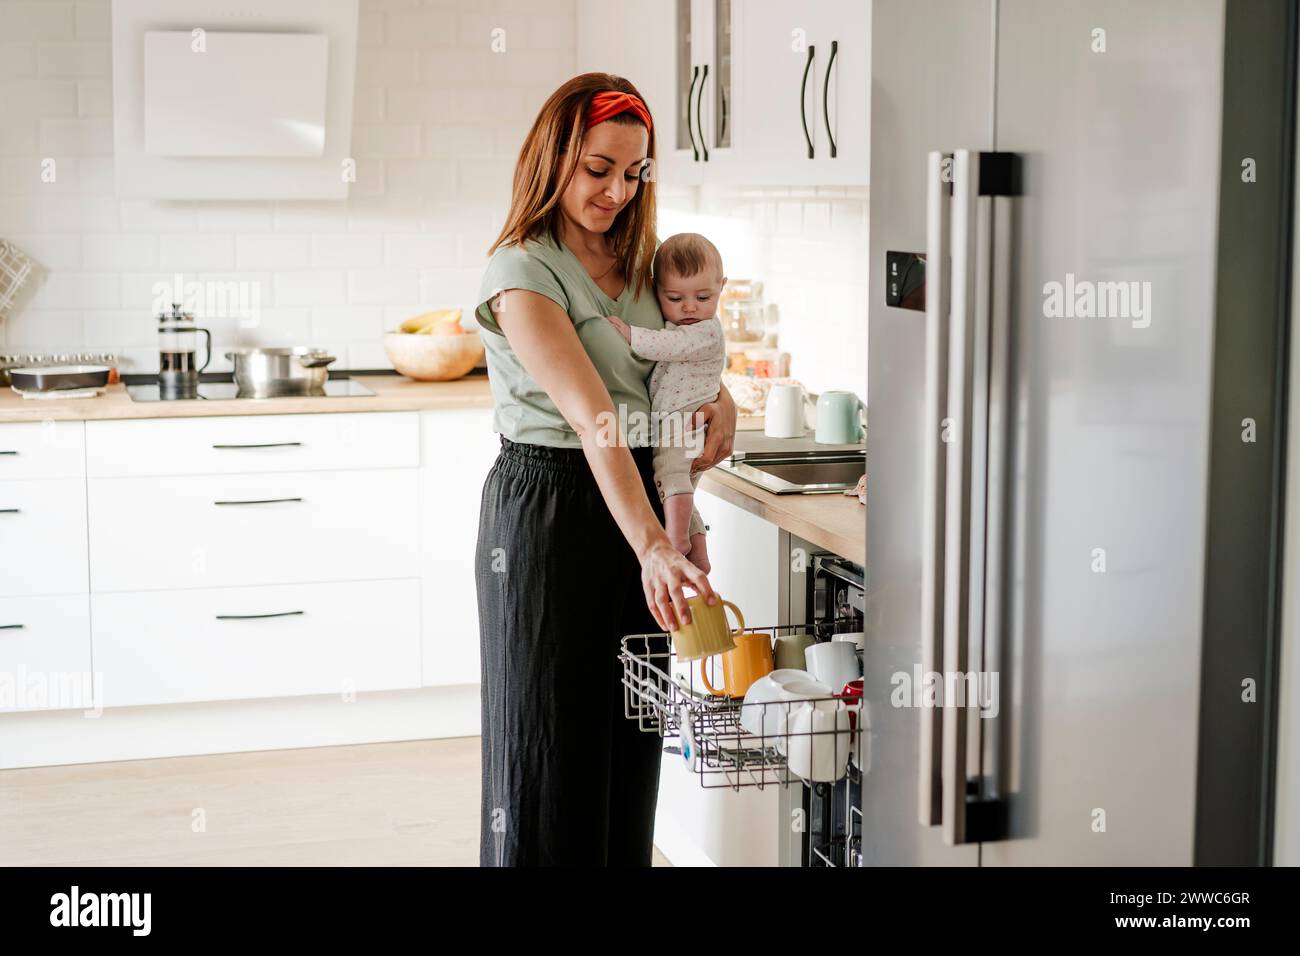 Woman carrying baby and taking out cup from dishwasher Stock Photo